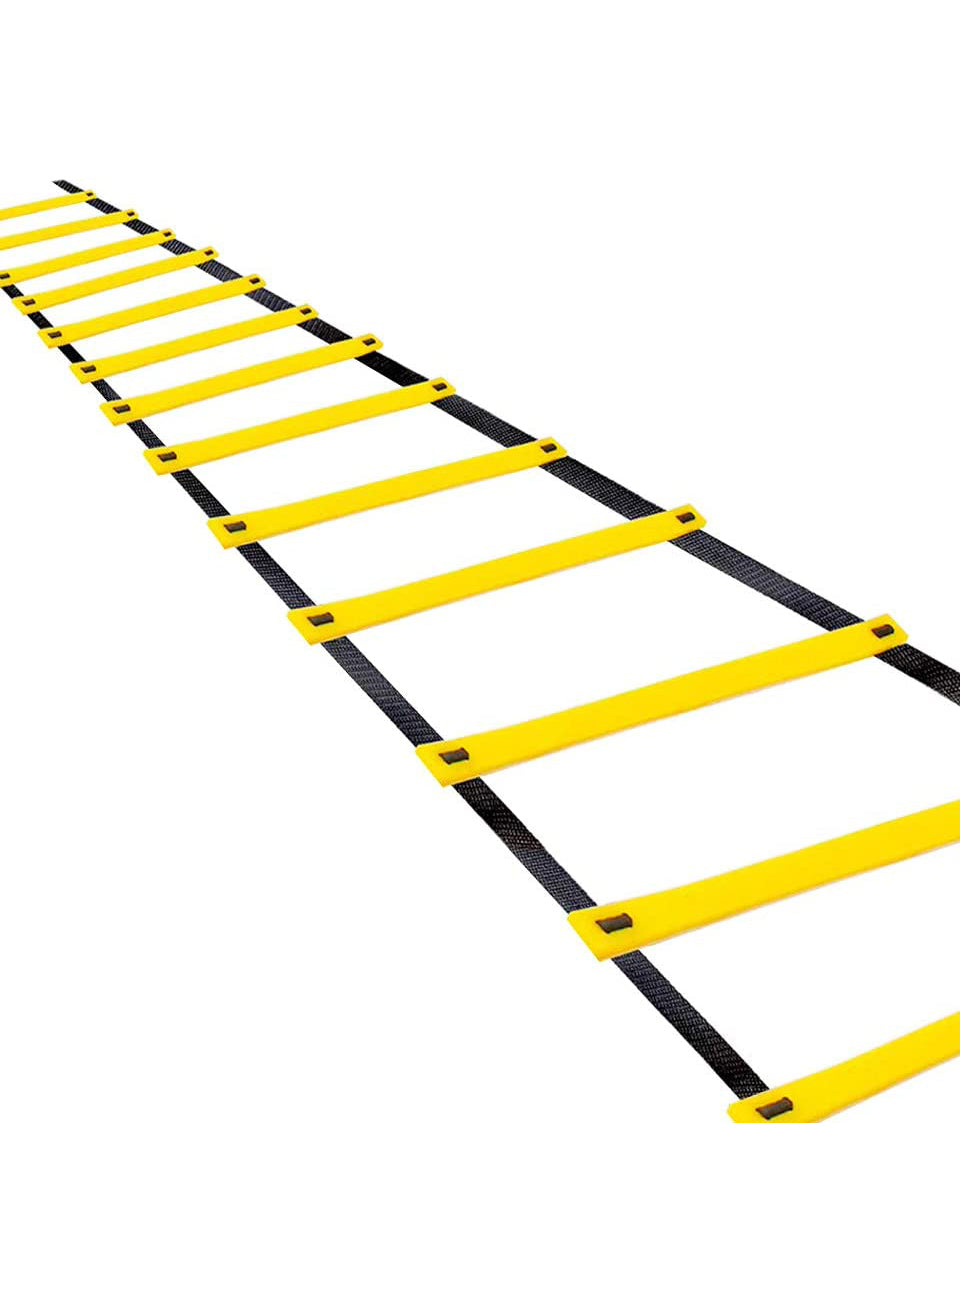 1441 Fitness Agility Ladder for cross fit training